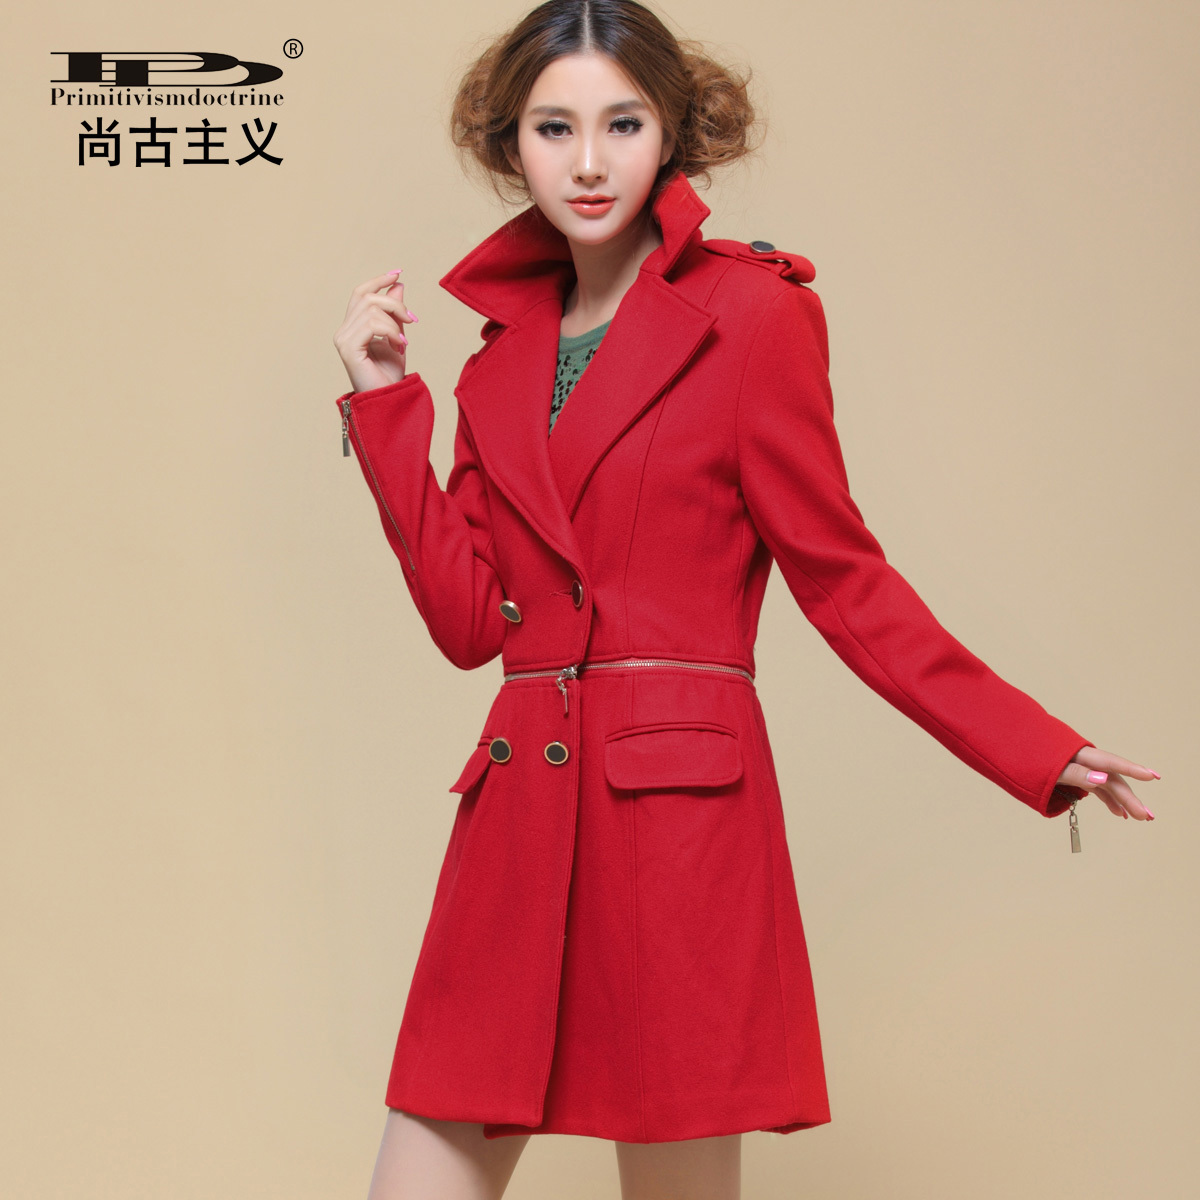 2012 personalized fashion the disassemblability solid color suit collar wool coat outerwear w80631